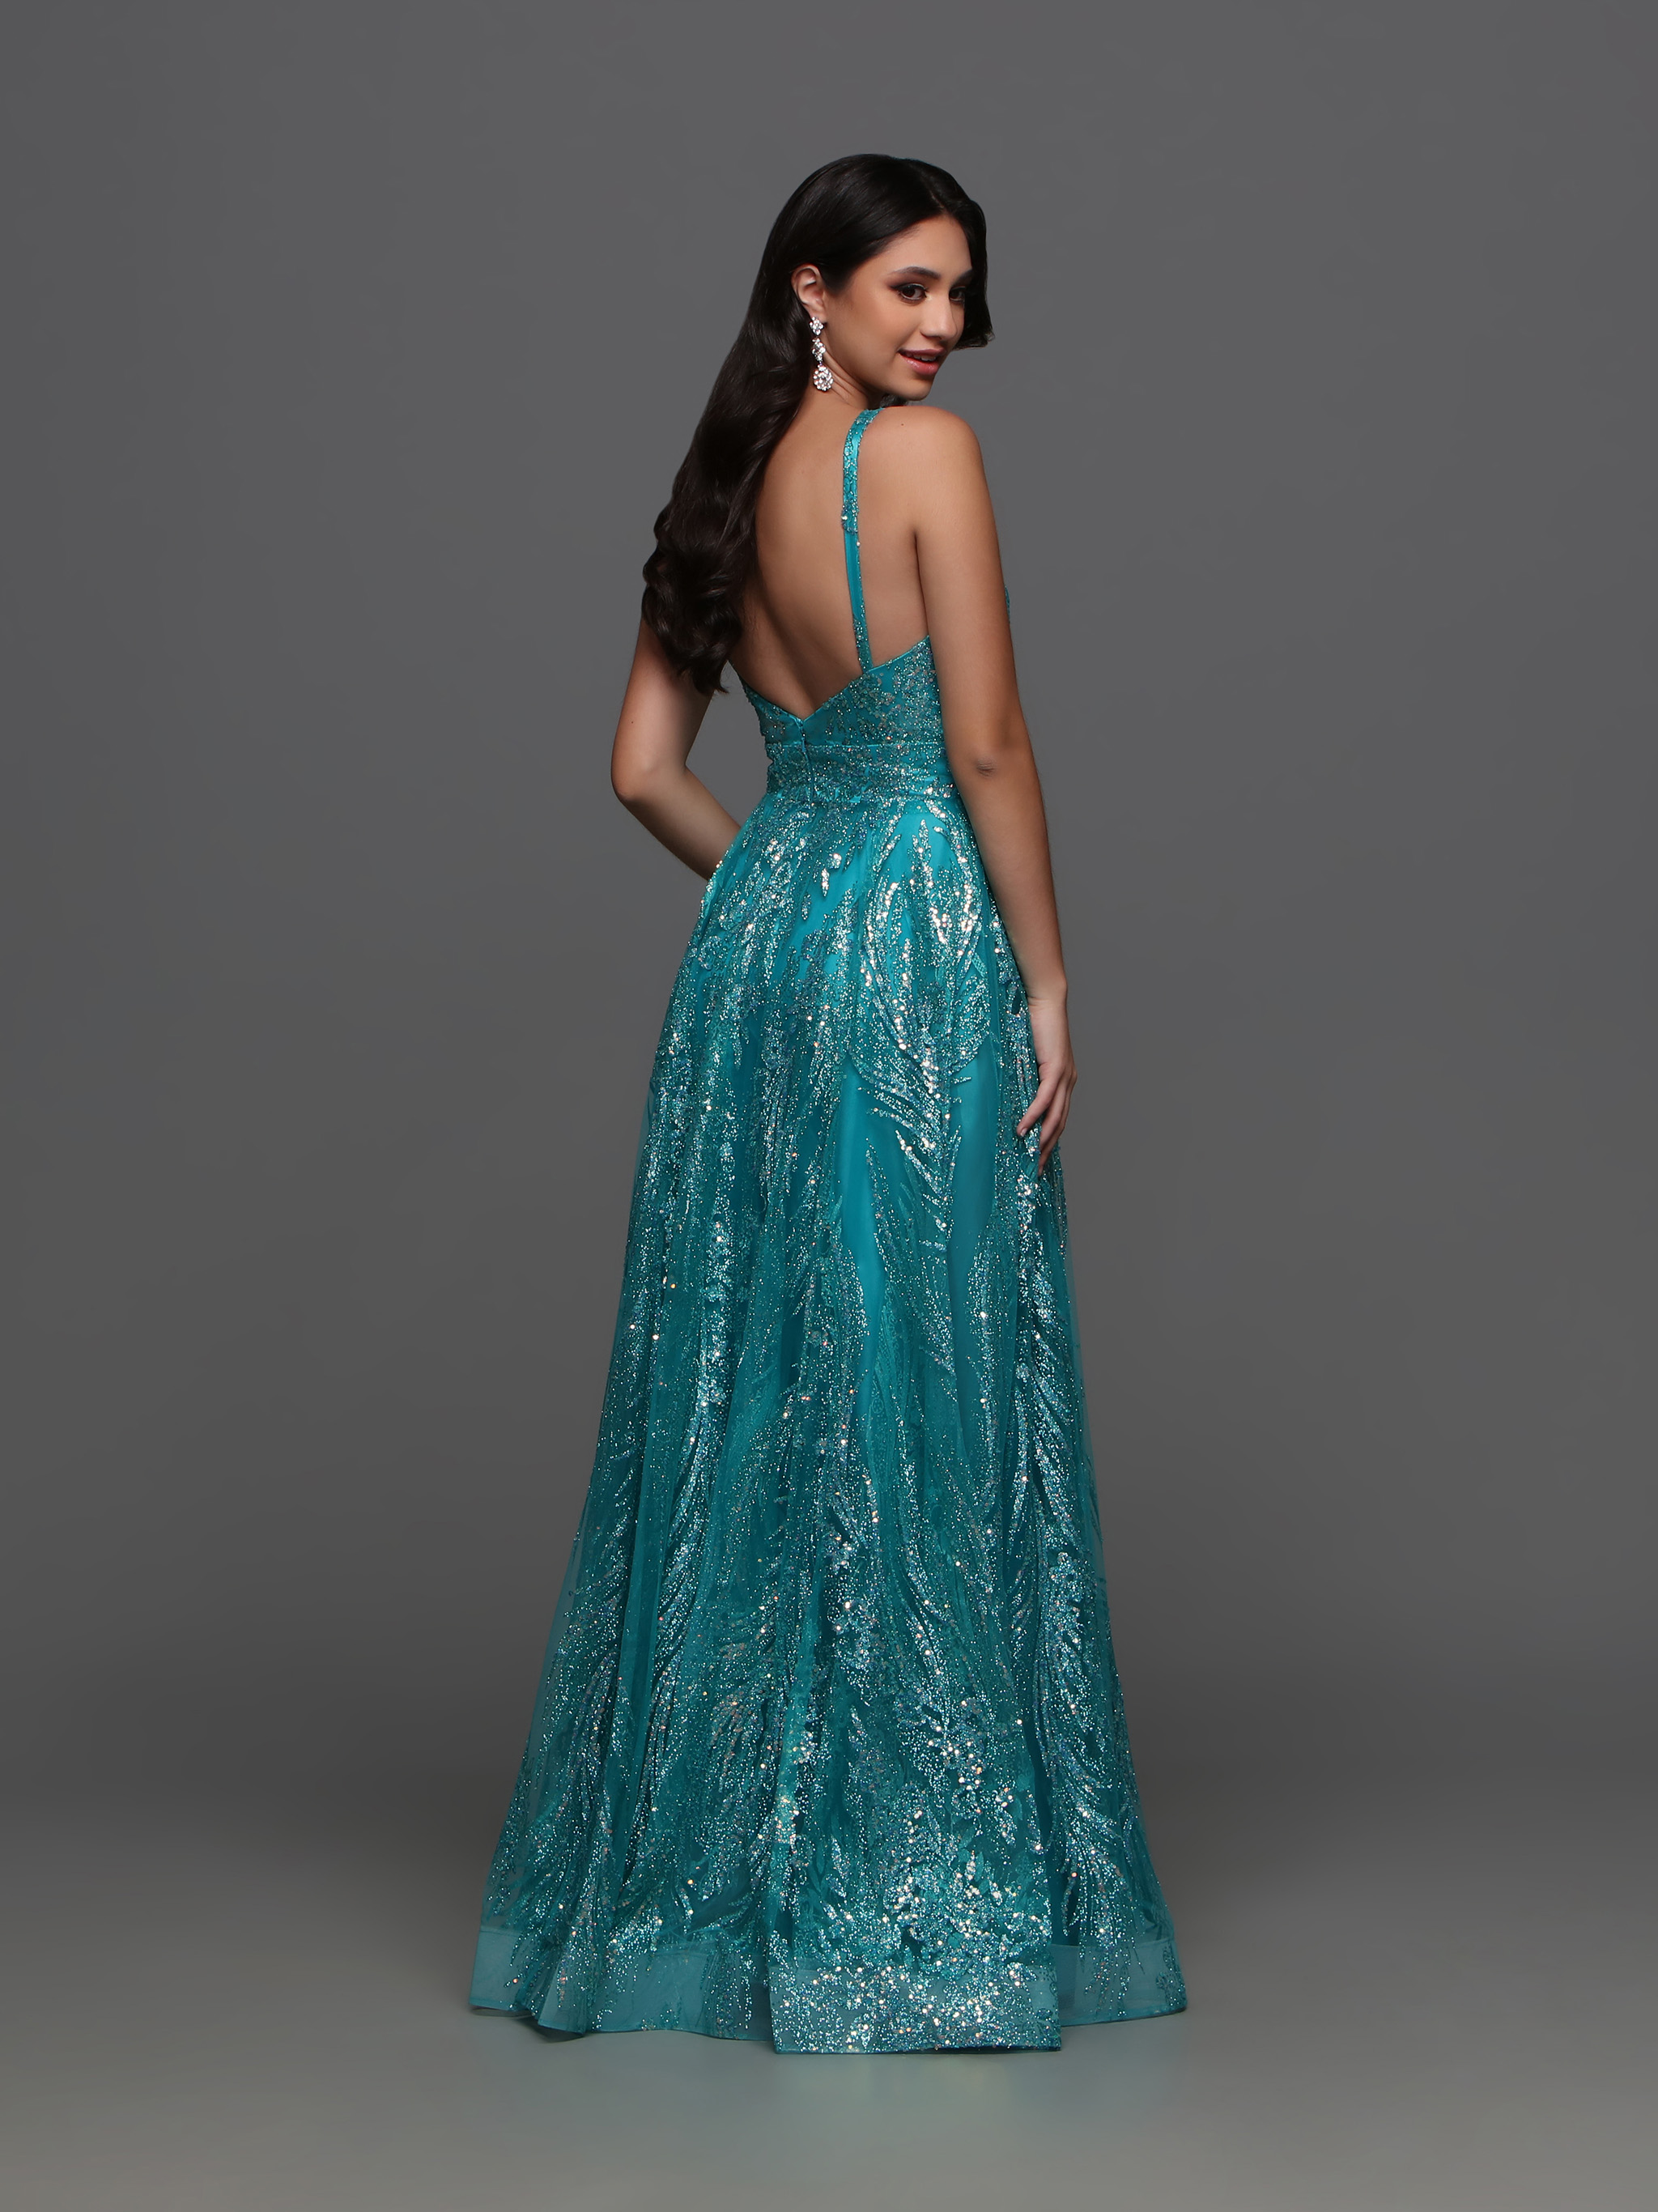 Image showing back view of style #72361